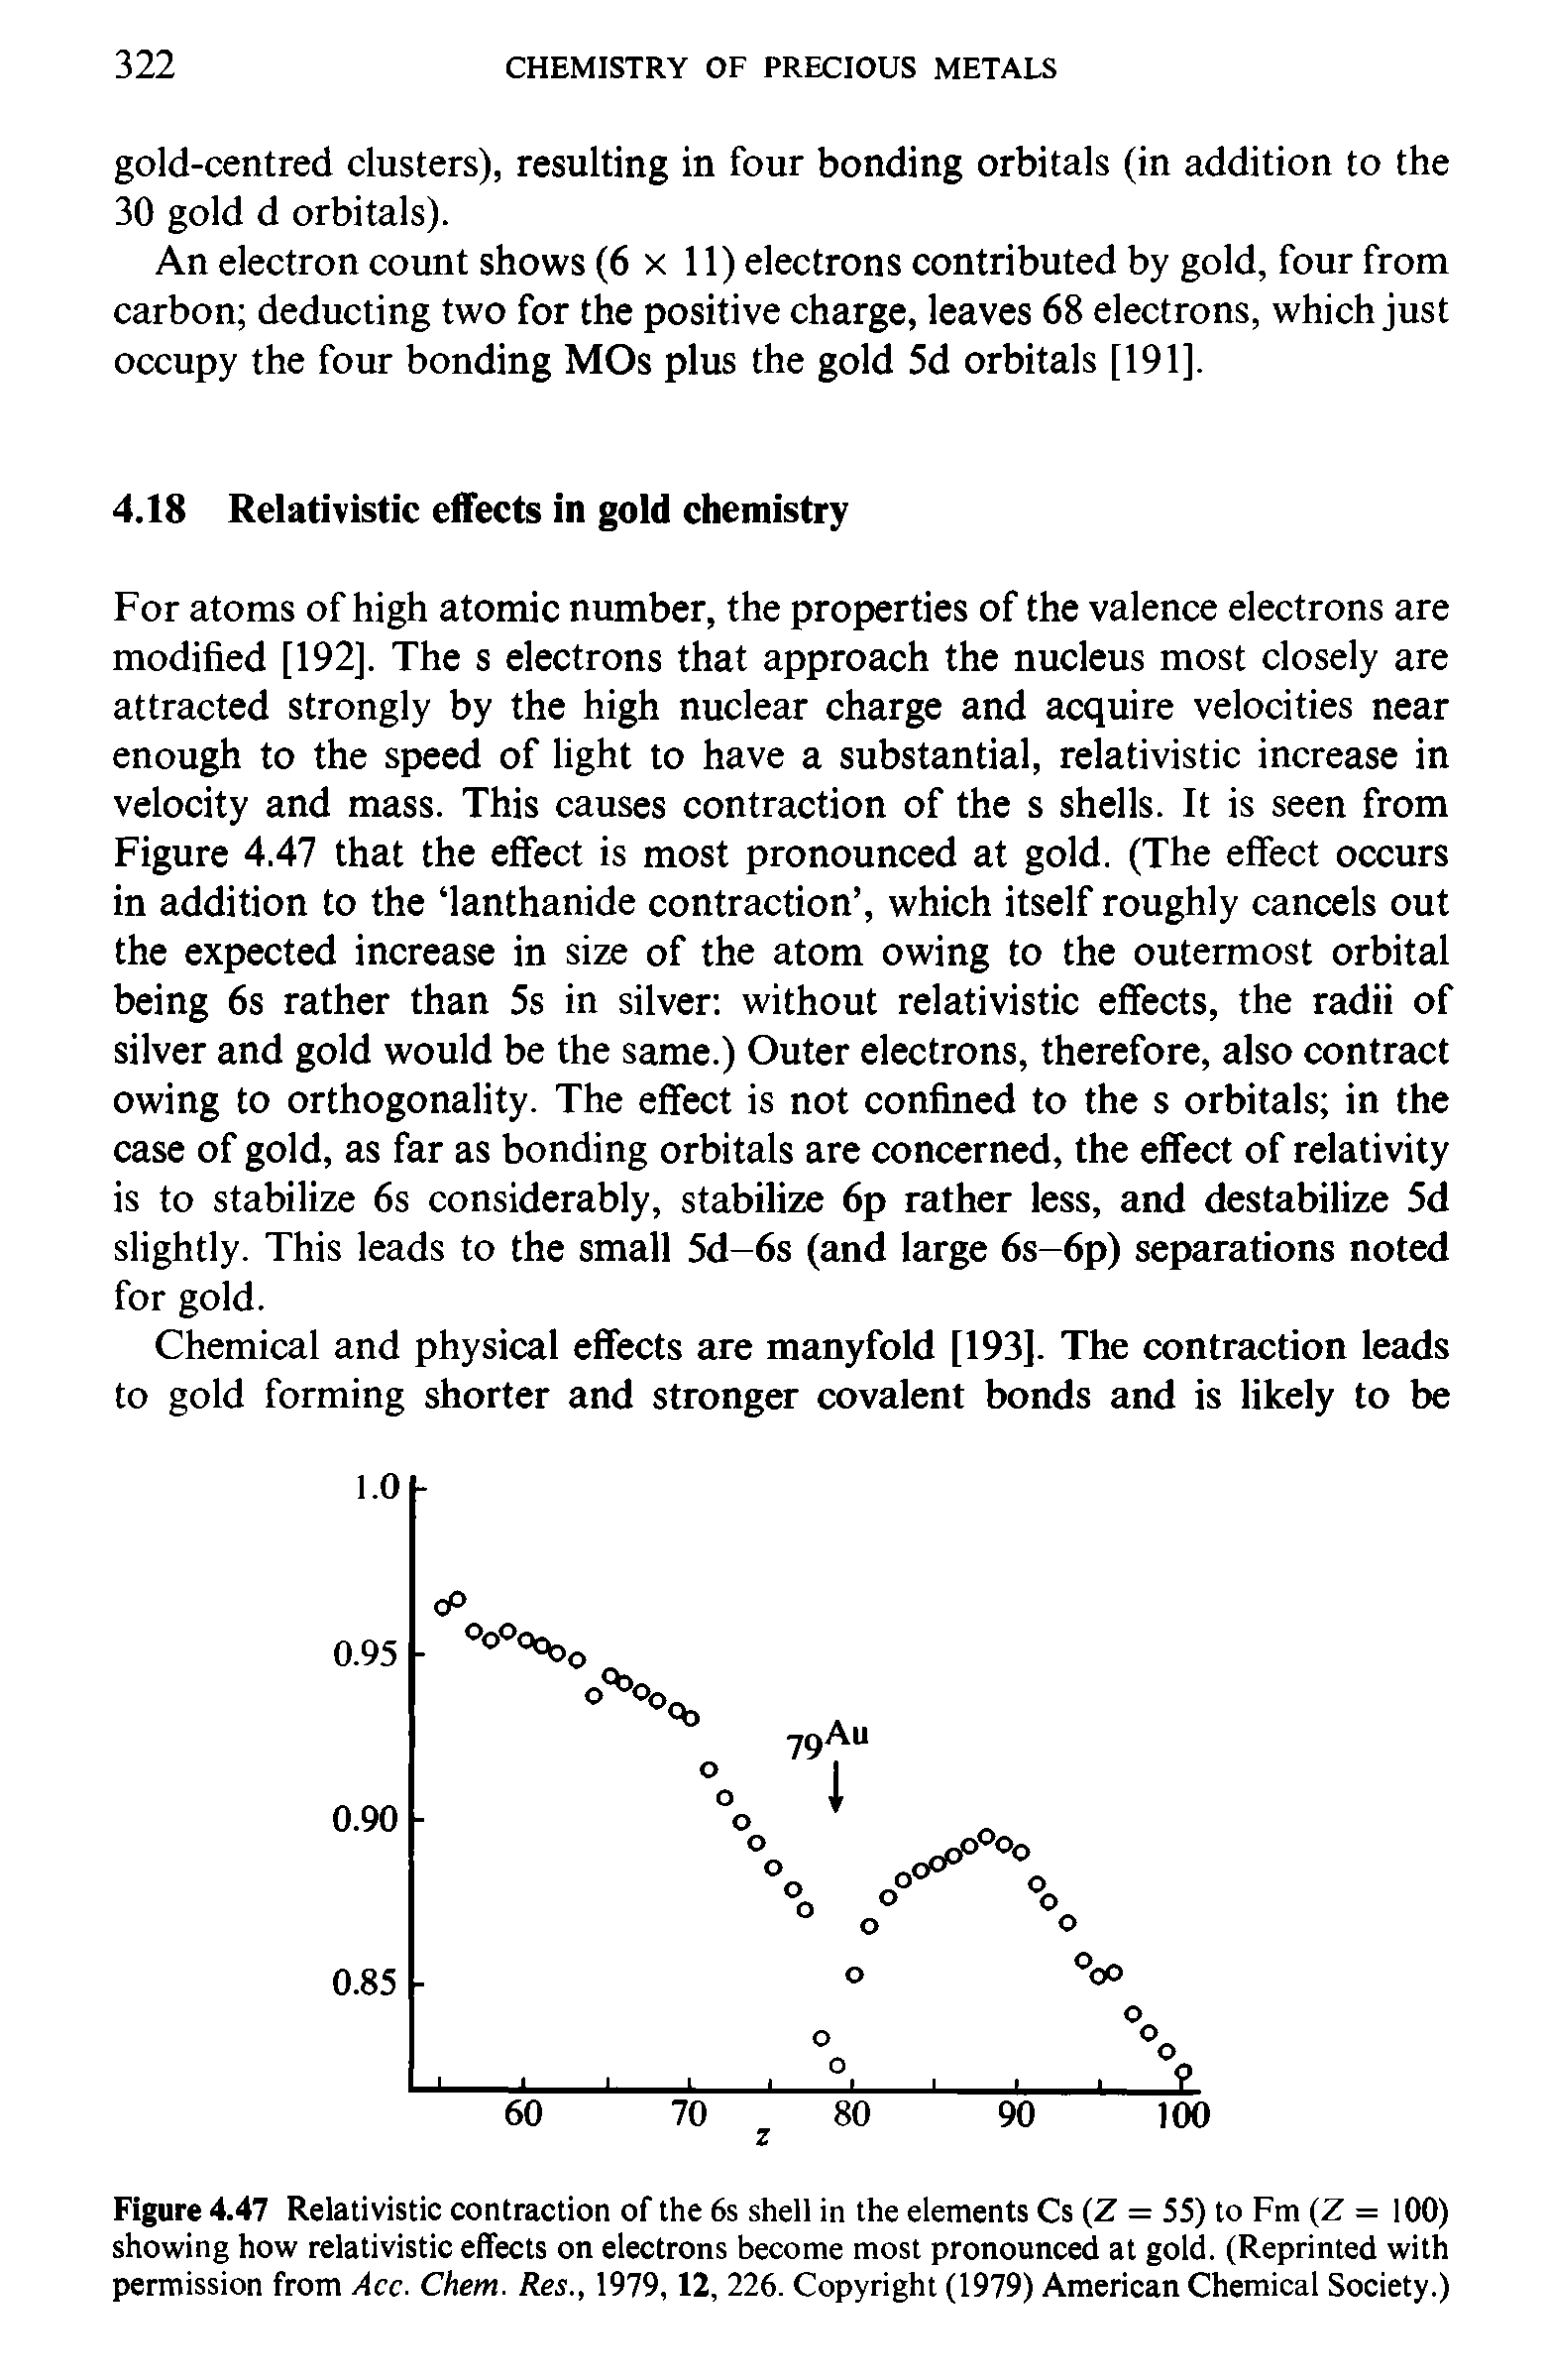 Figure 4.47 Relativistic contraction of the 6s shell in the elements Cs (Z = 55) to Fm (Z = 100) showing how relativistic effects on electrons become most pronounced at gold. (Reprinted with permission from Acc. Chem. Res., 1979,12, 226. Copyright (1979) American Chemical Society.)...